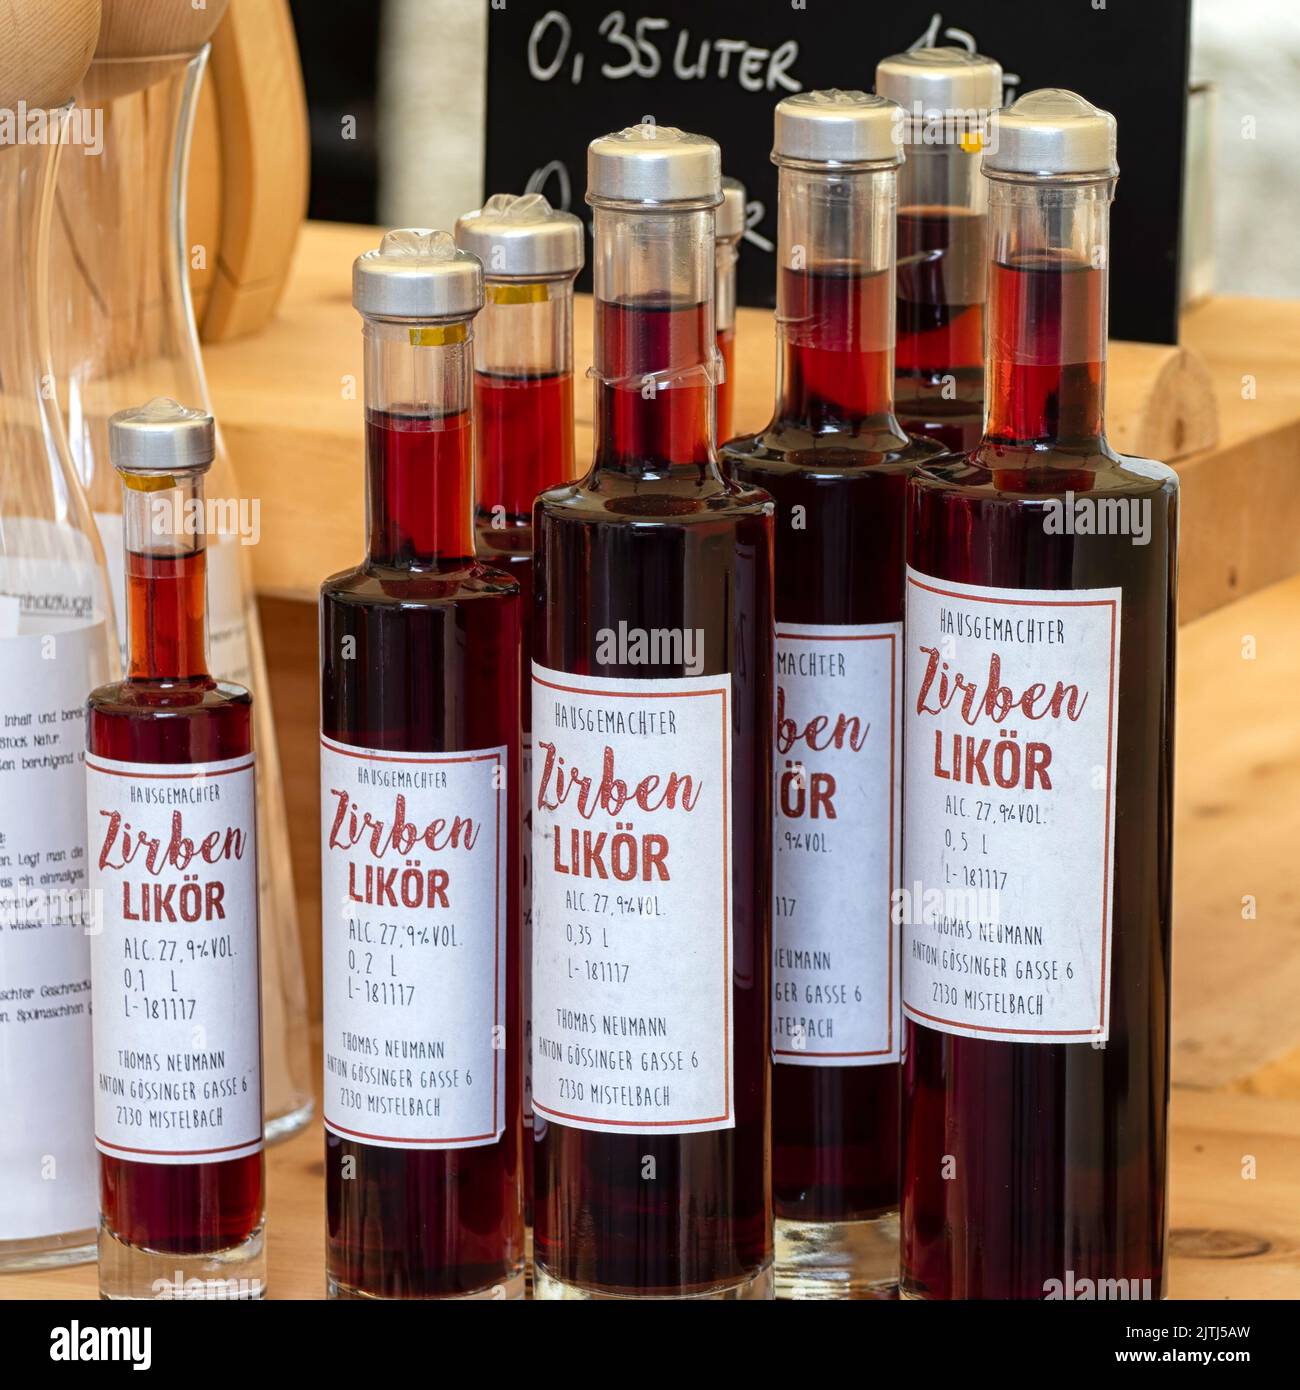 KREMS, AUSTRIA - JULY 13, 2019:  Bottles of Pine Liqueur (Zirben Likor) at a market stall in the Old Town Stock Photo